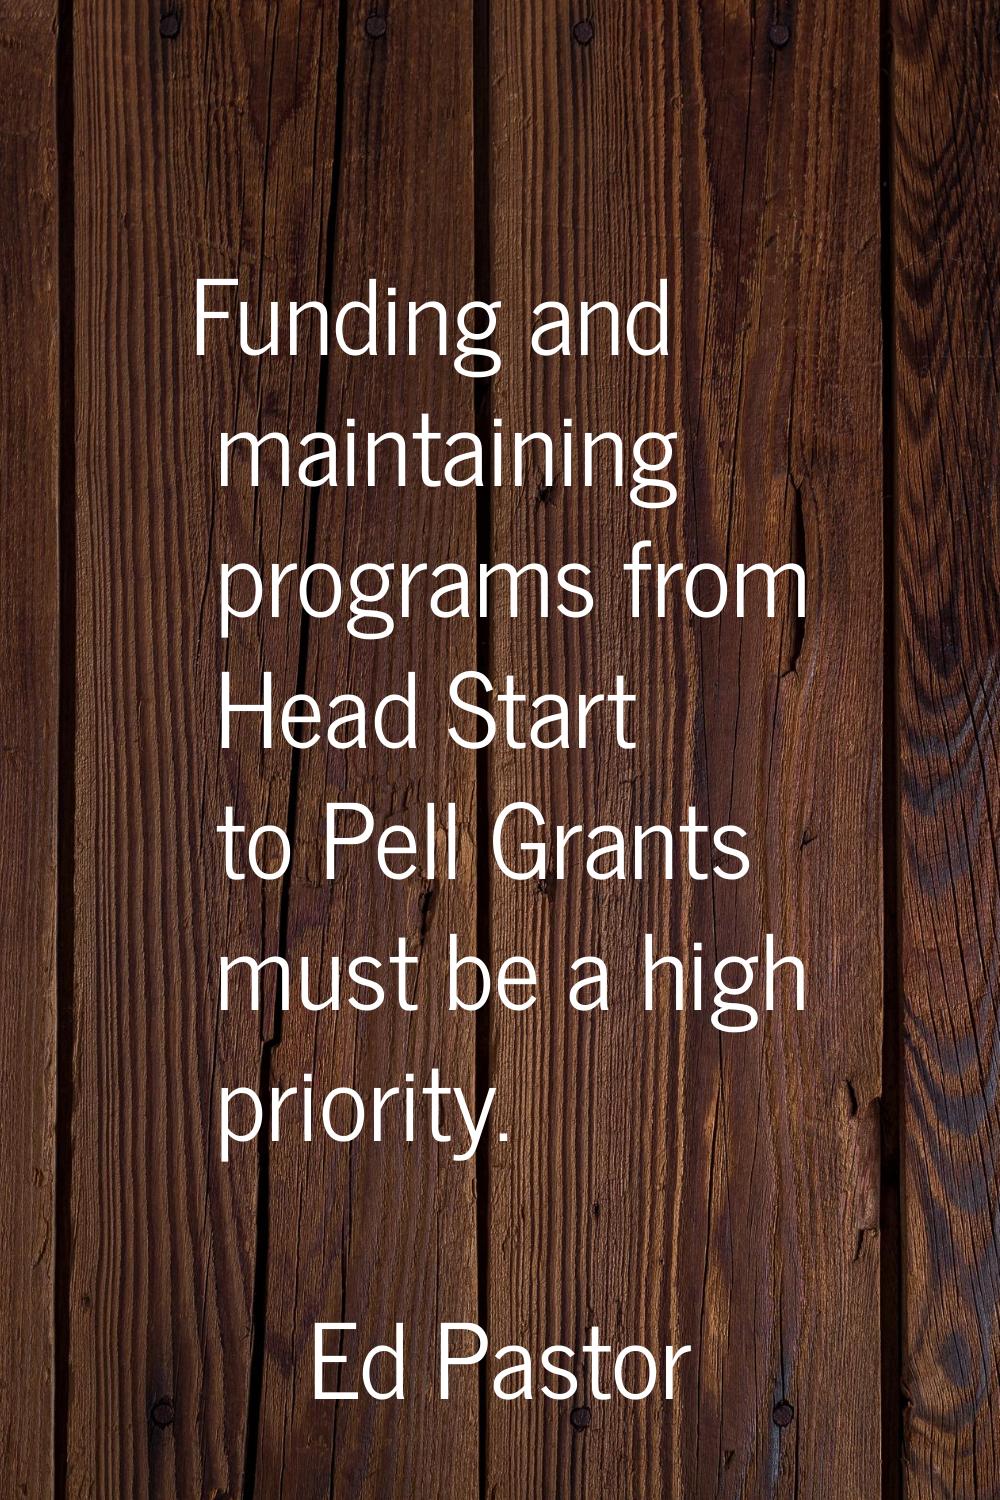 Funding and maintaining programs from Head Start to Pell Grants must be a high priority.